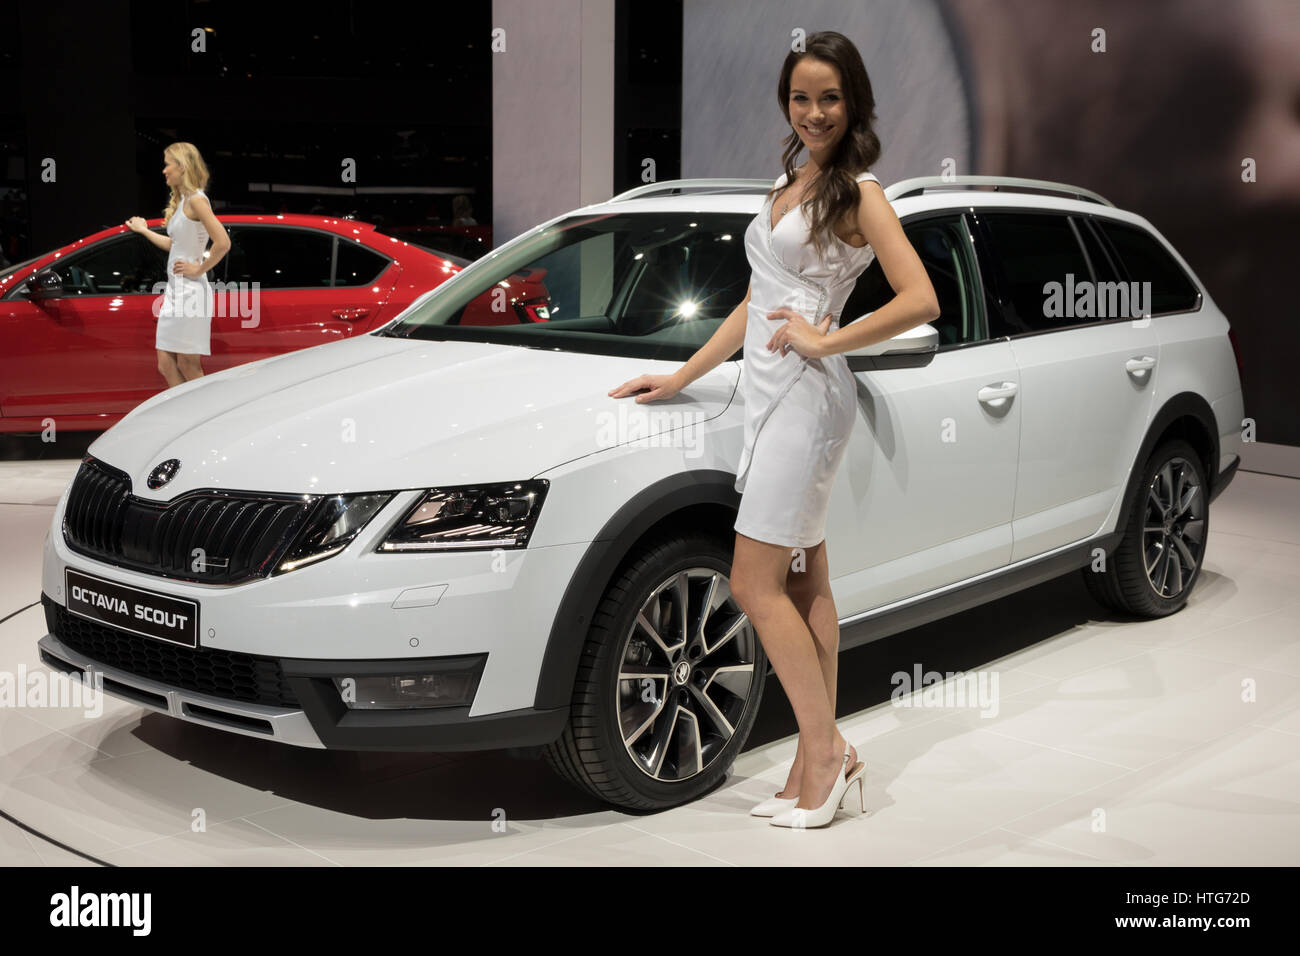 Skoda Octavia High Resolution Stock Photography and Images - Alamy